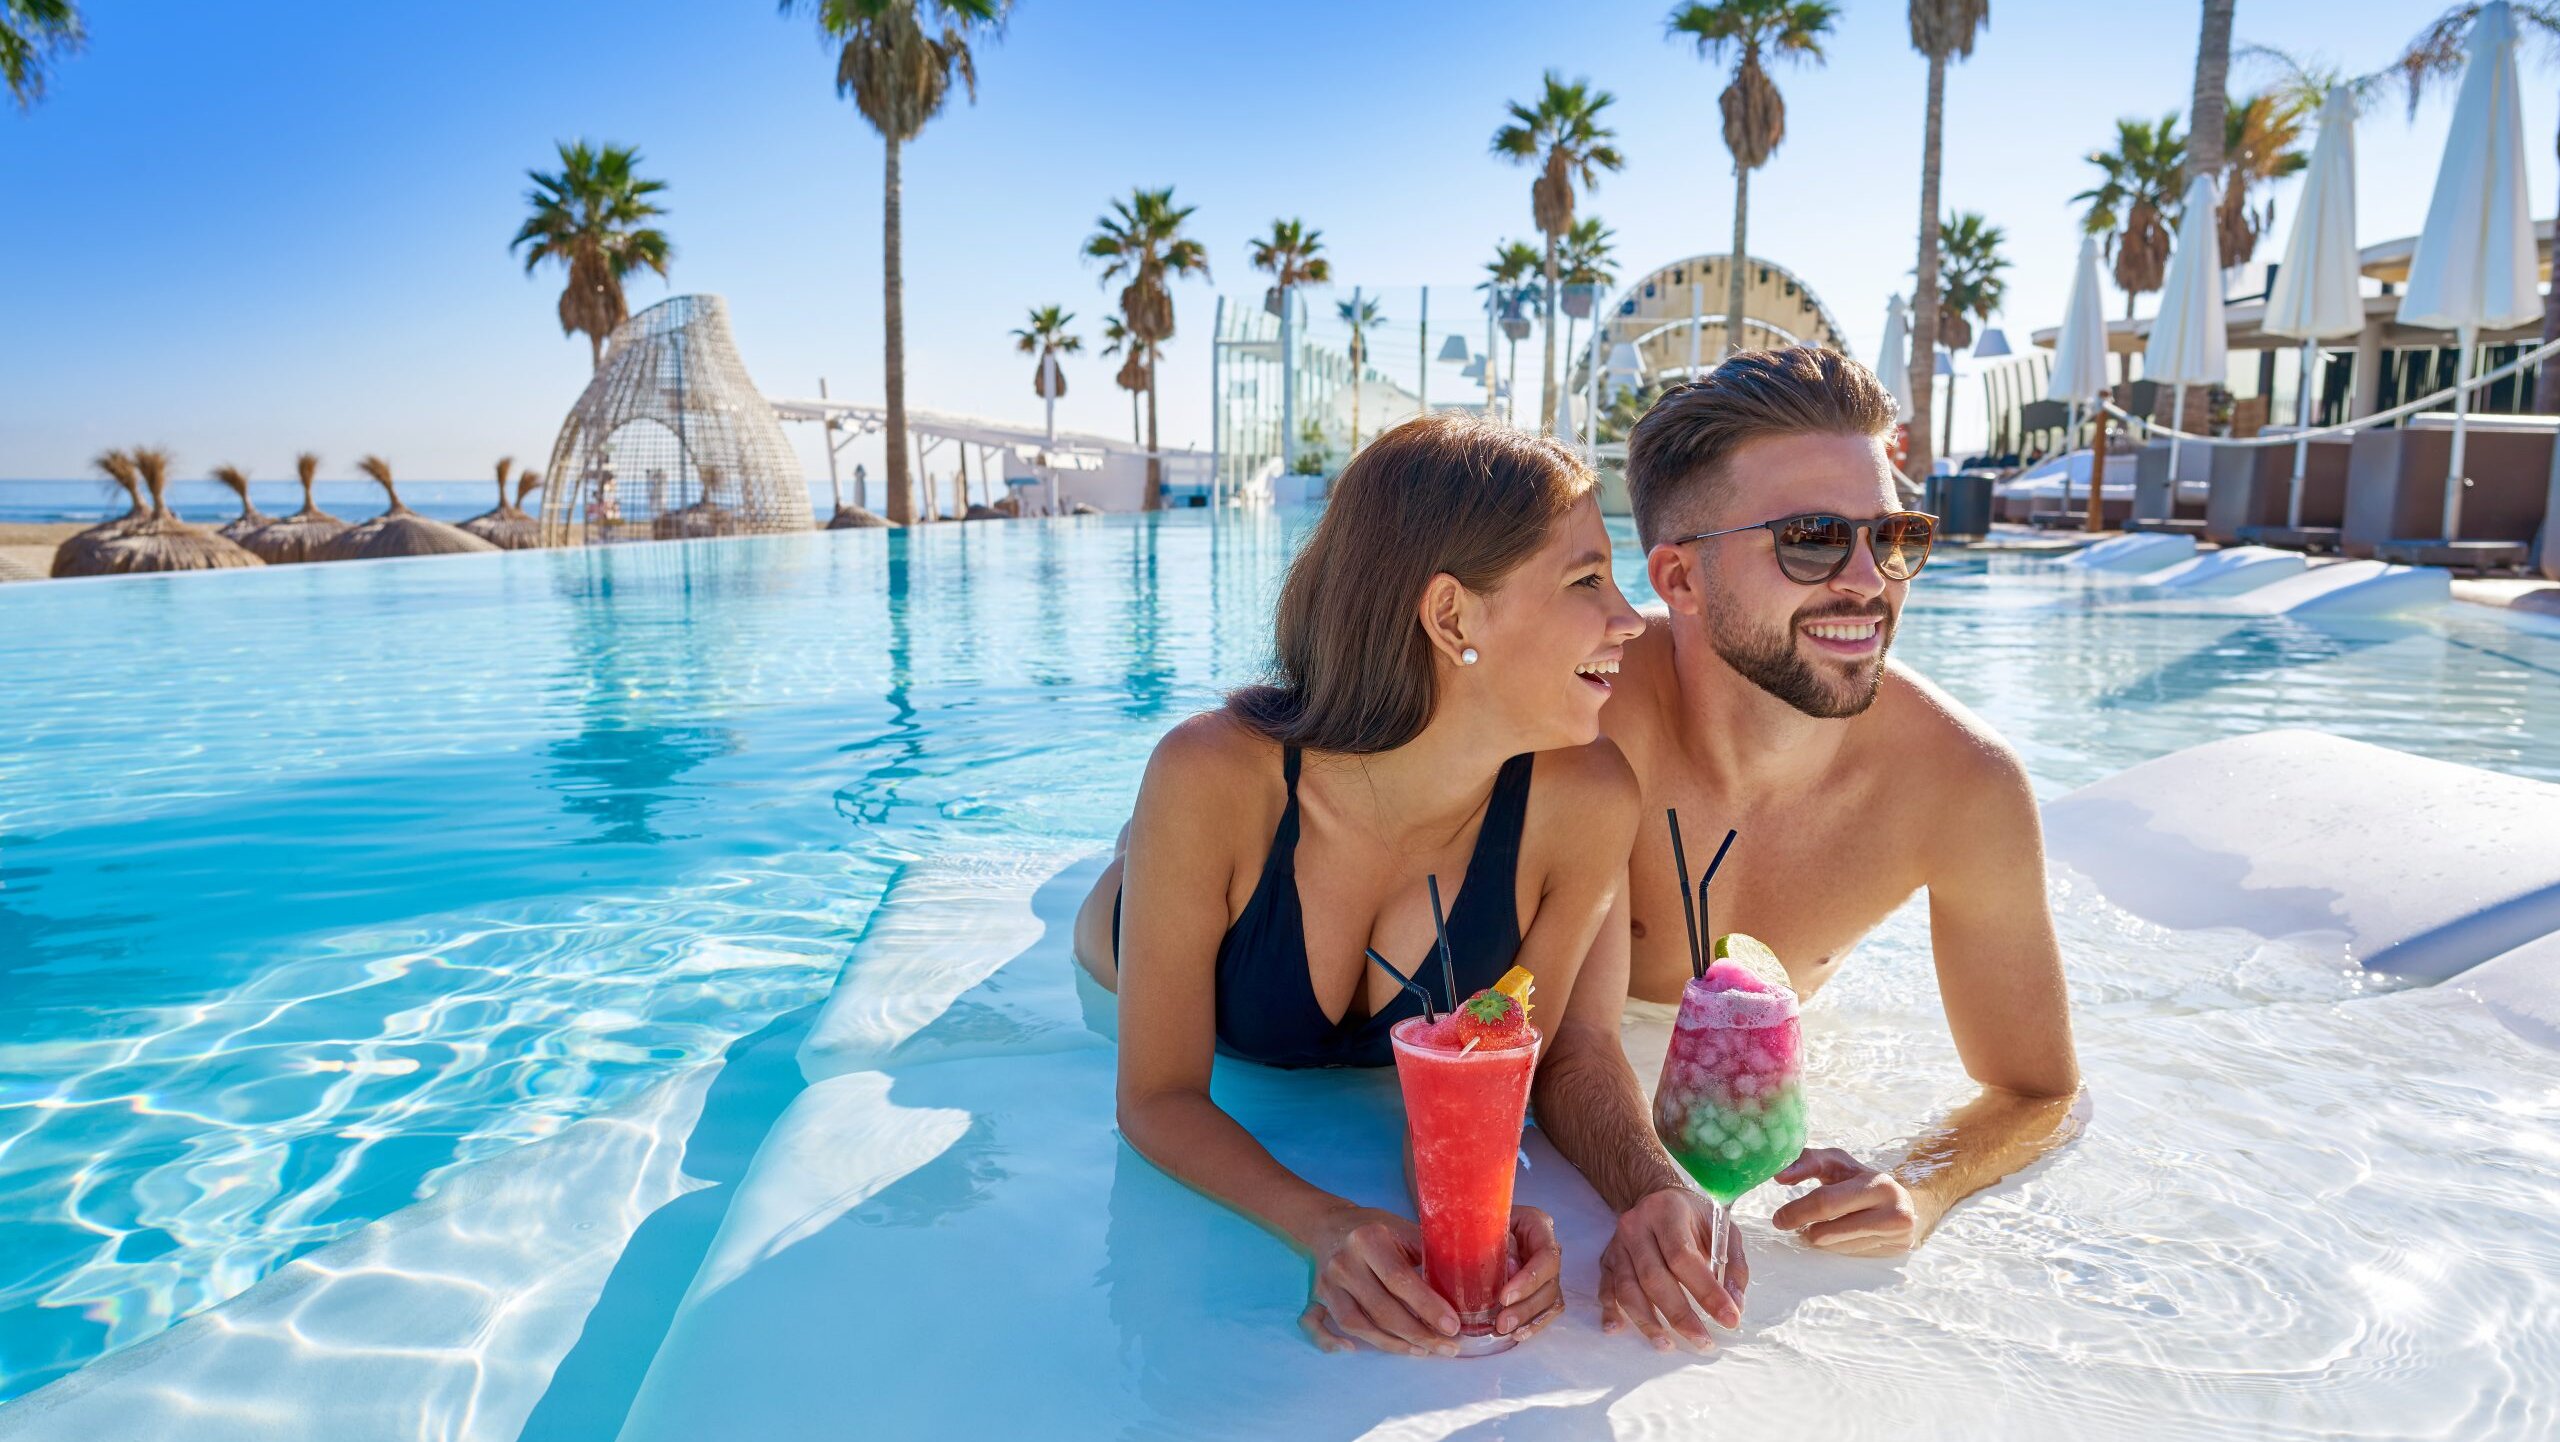 Young couple enjoys vacation in pool with cocktails